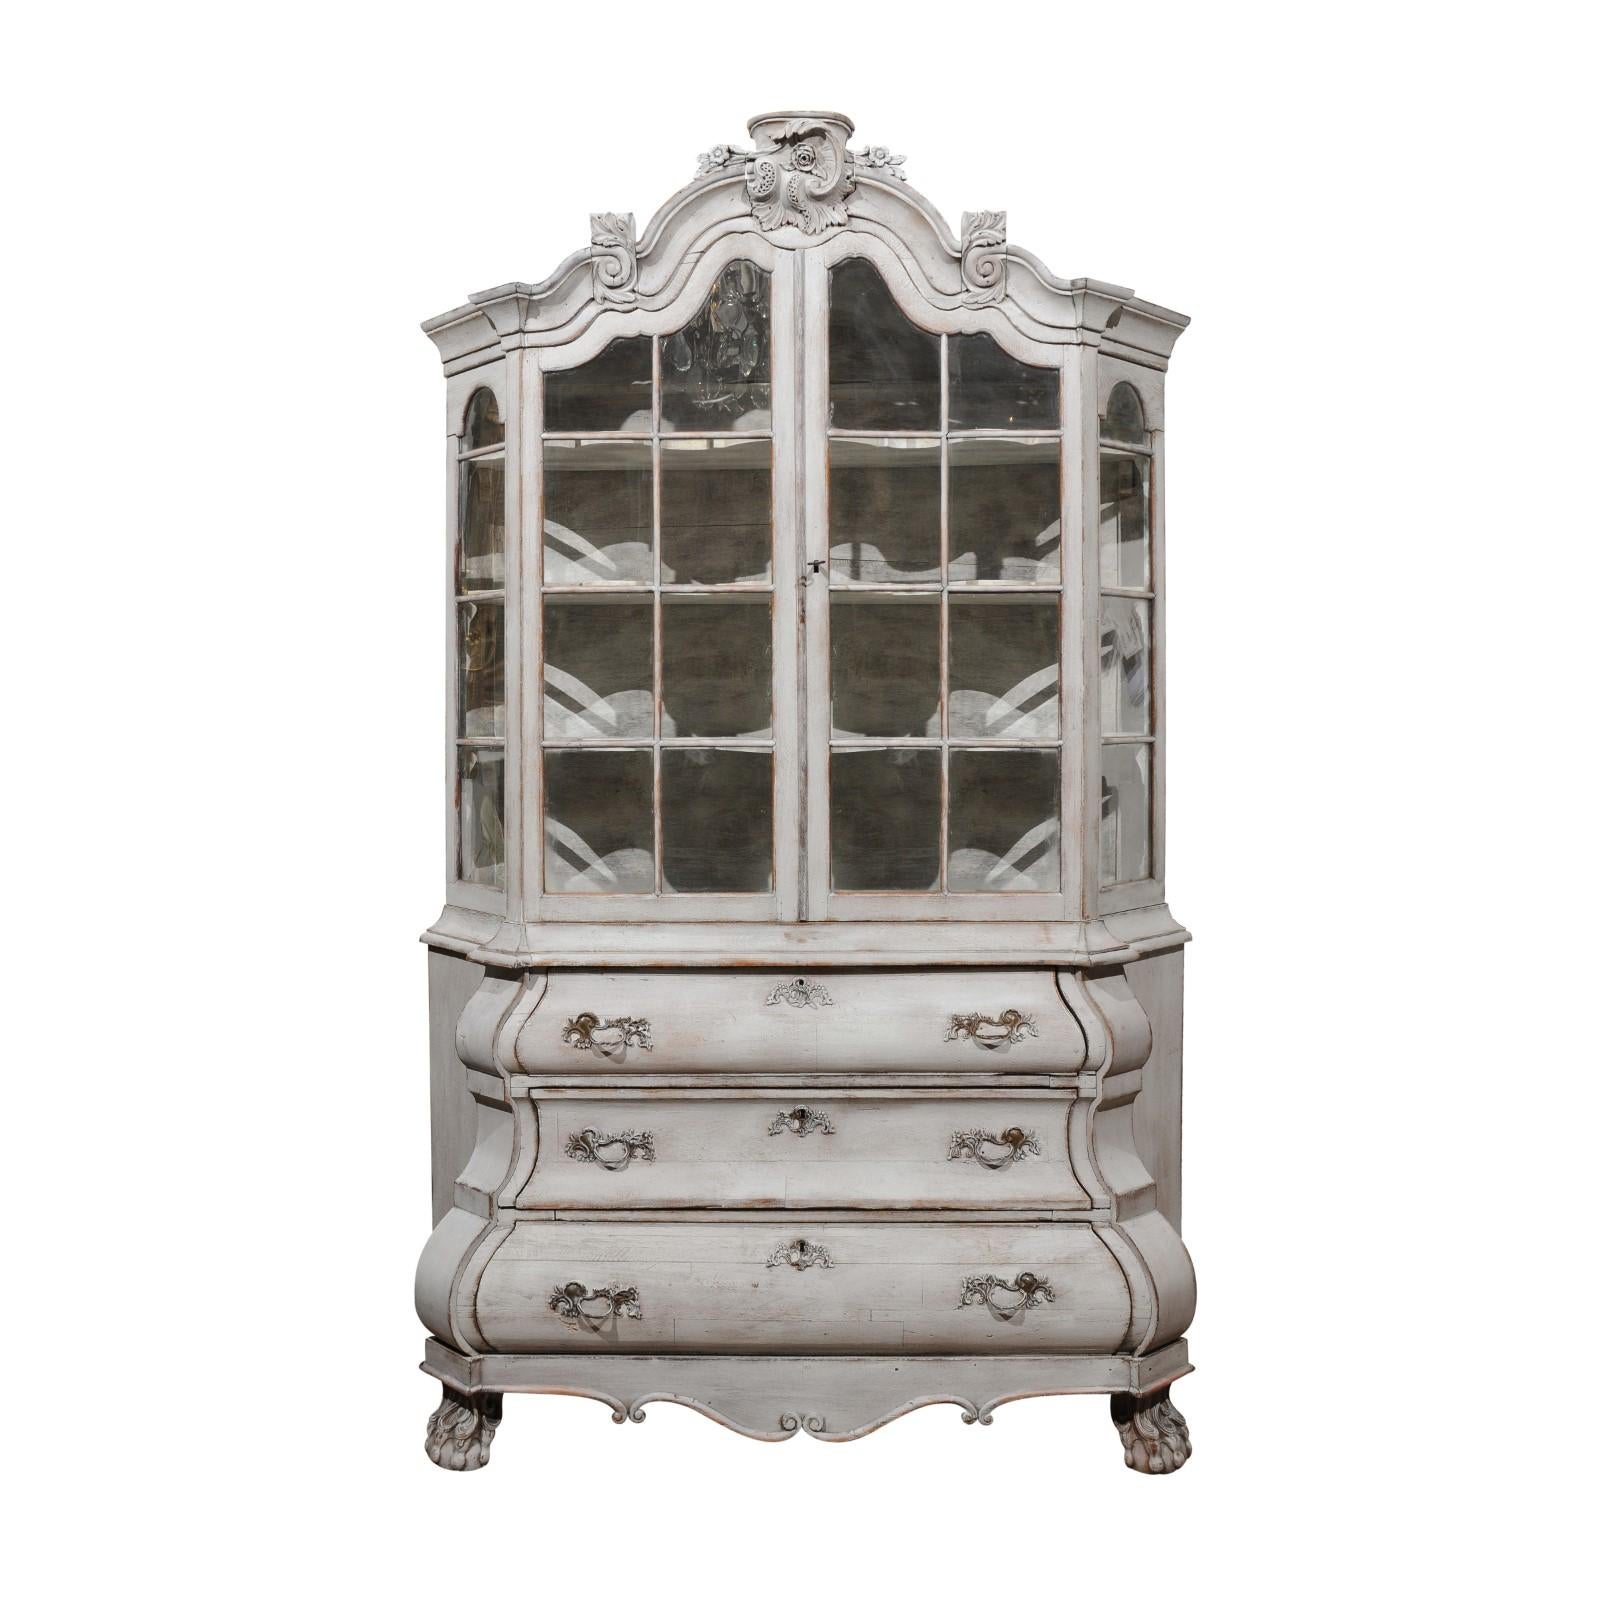 Dutch 19th Century Rococo Style Painted Vitrine with Glass Doors and Bombé Chest